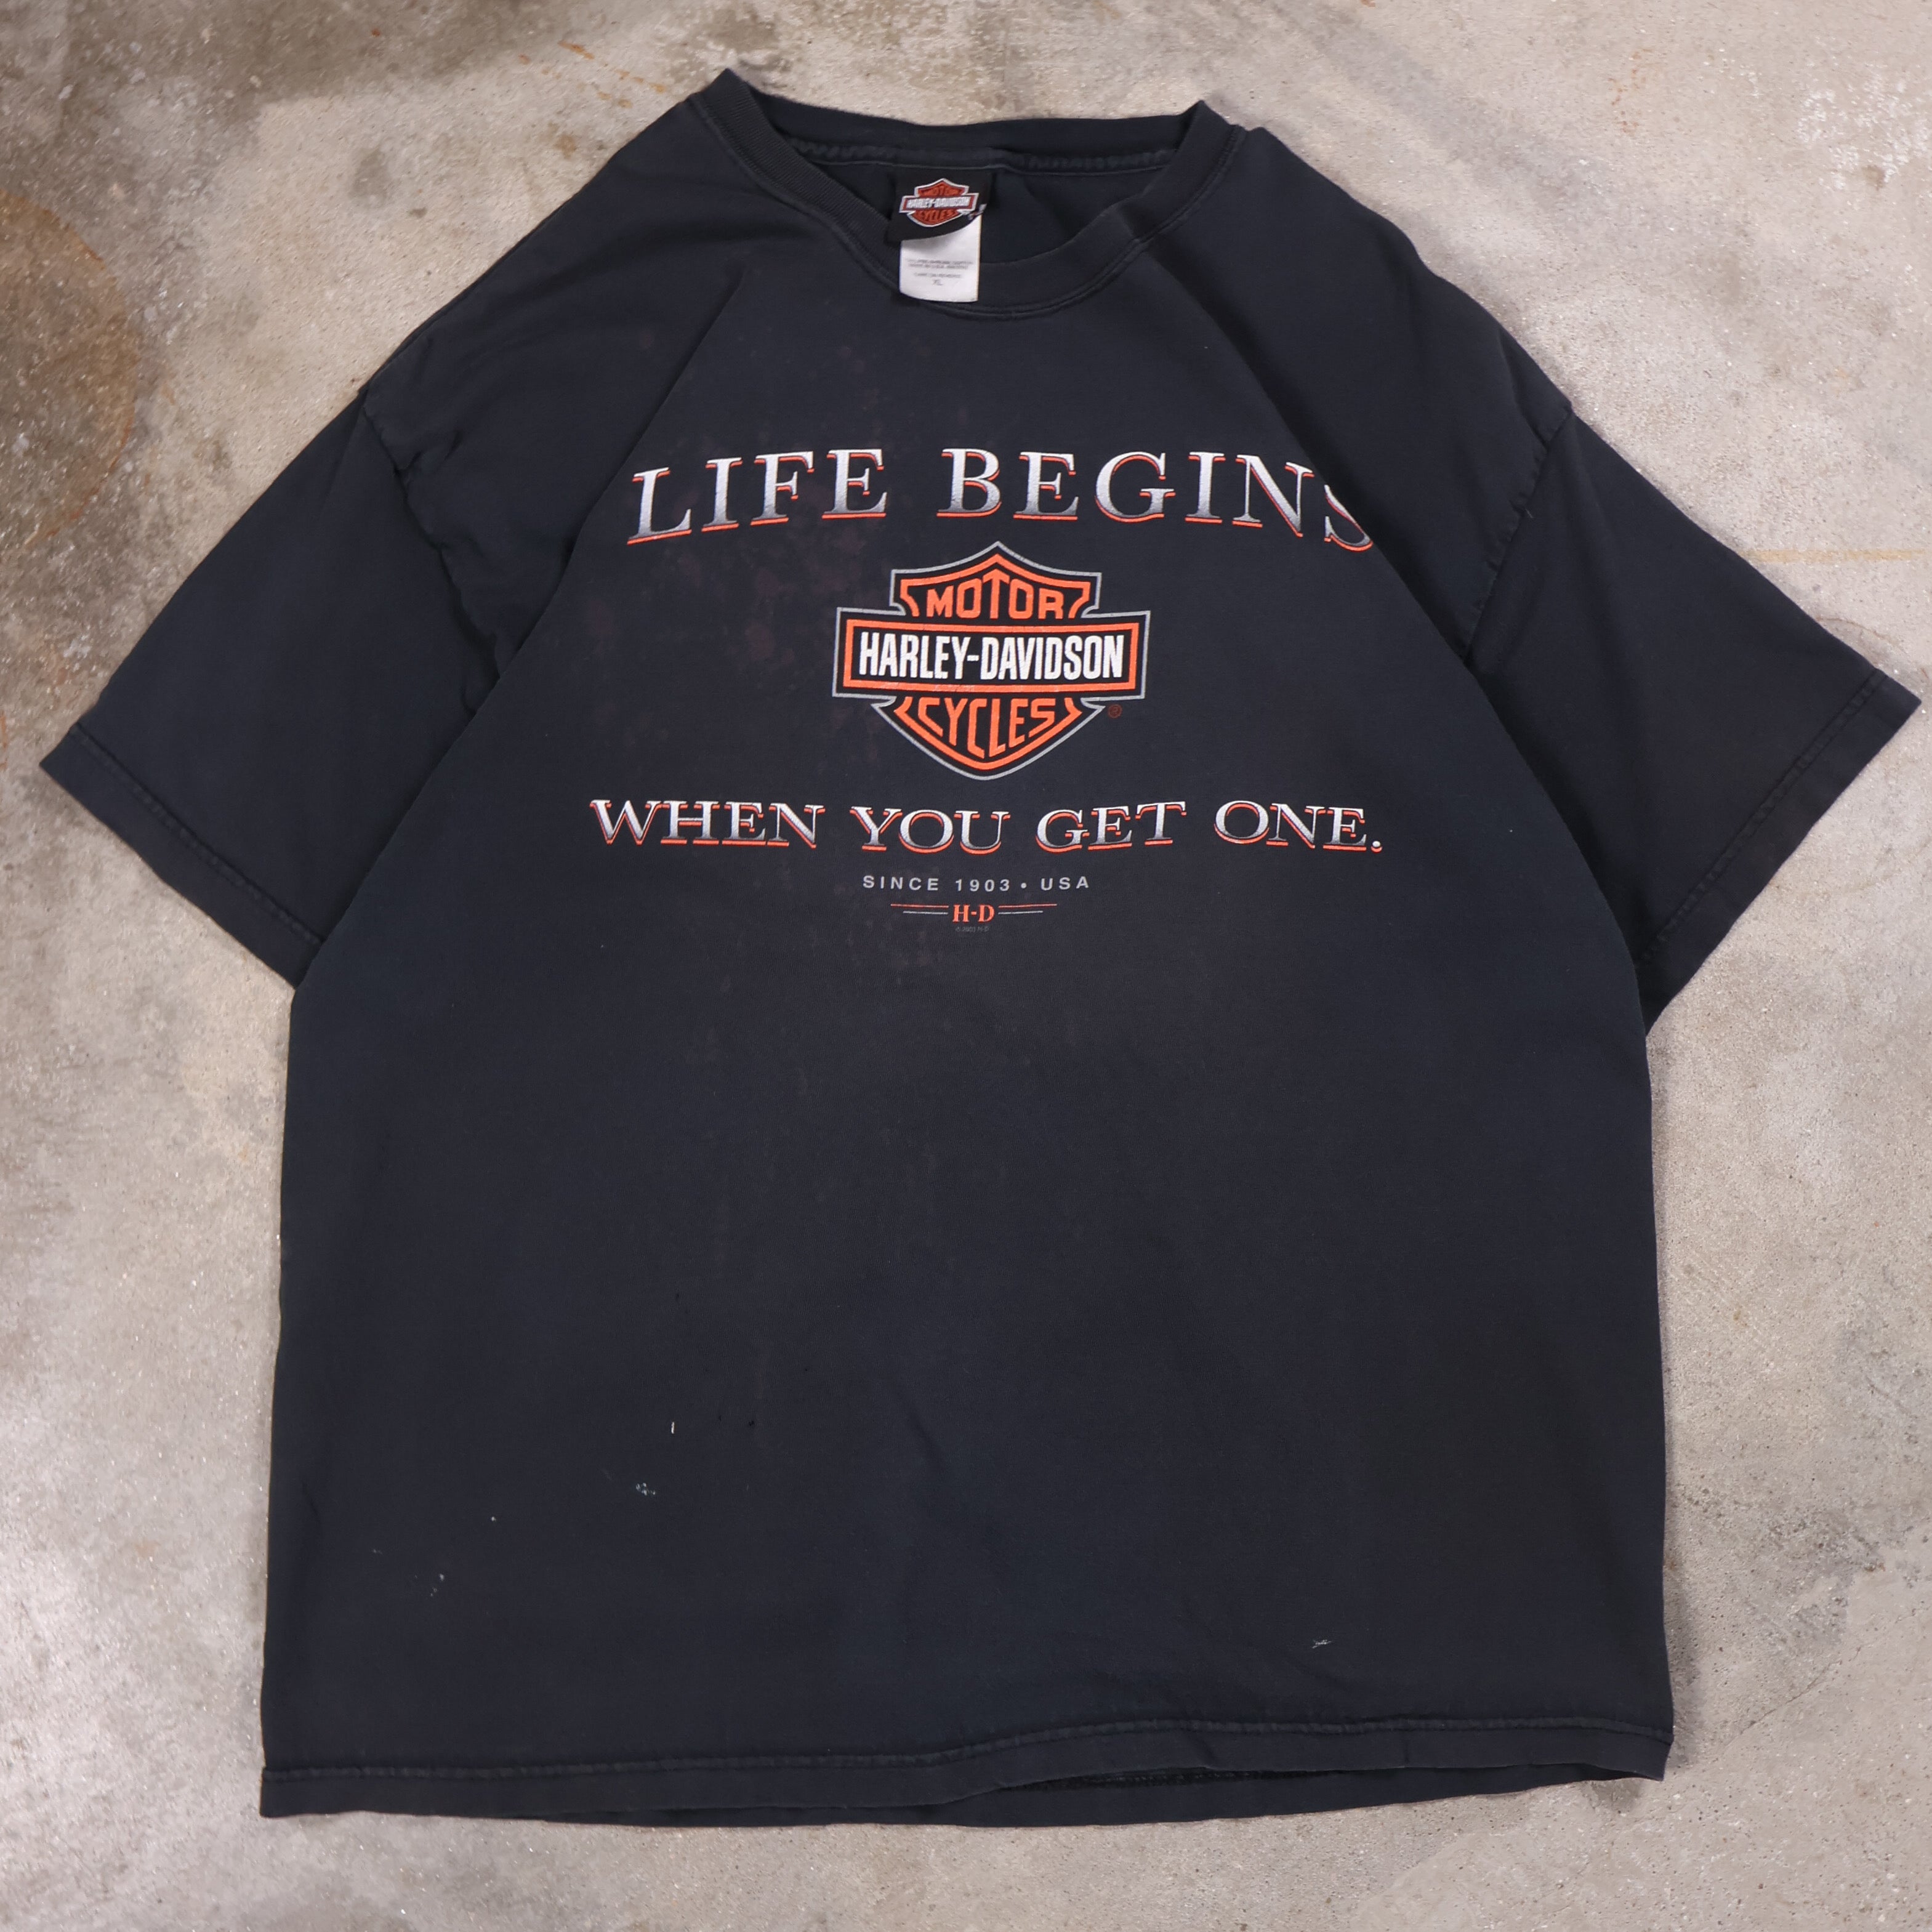 Harley Davidson "Life Begins When You Get One" T-Shirt 00s (XL)